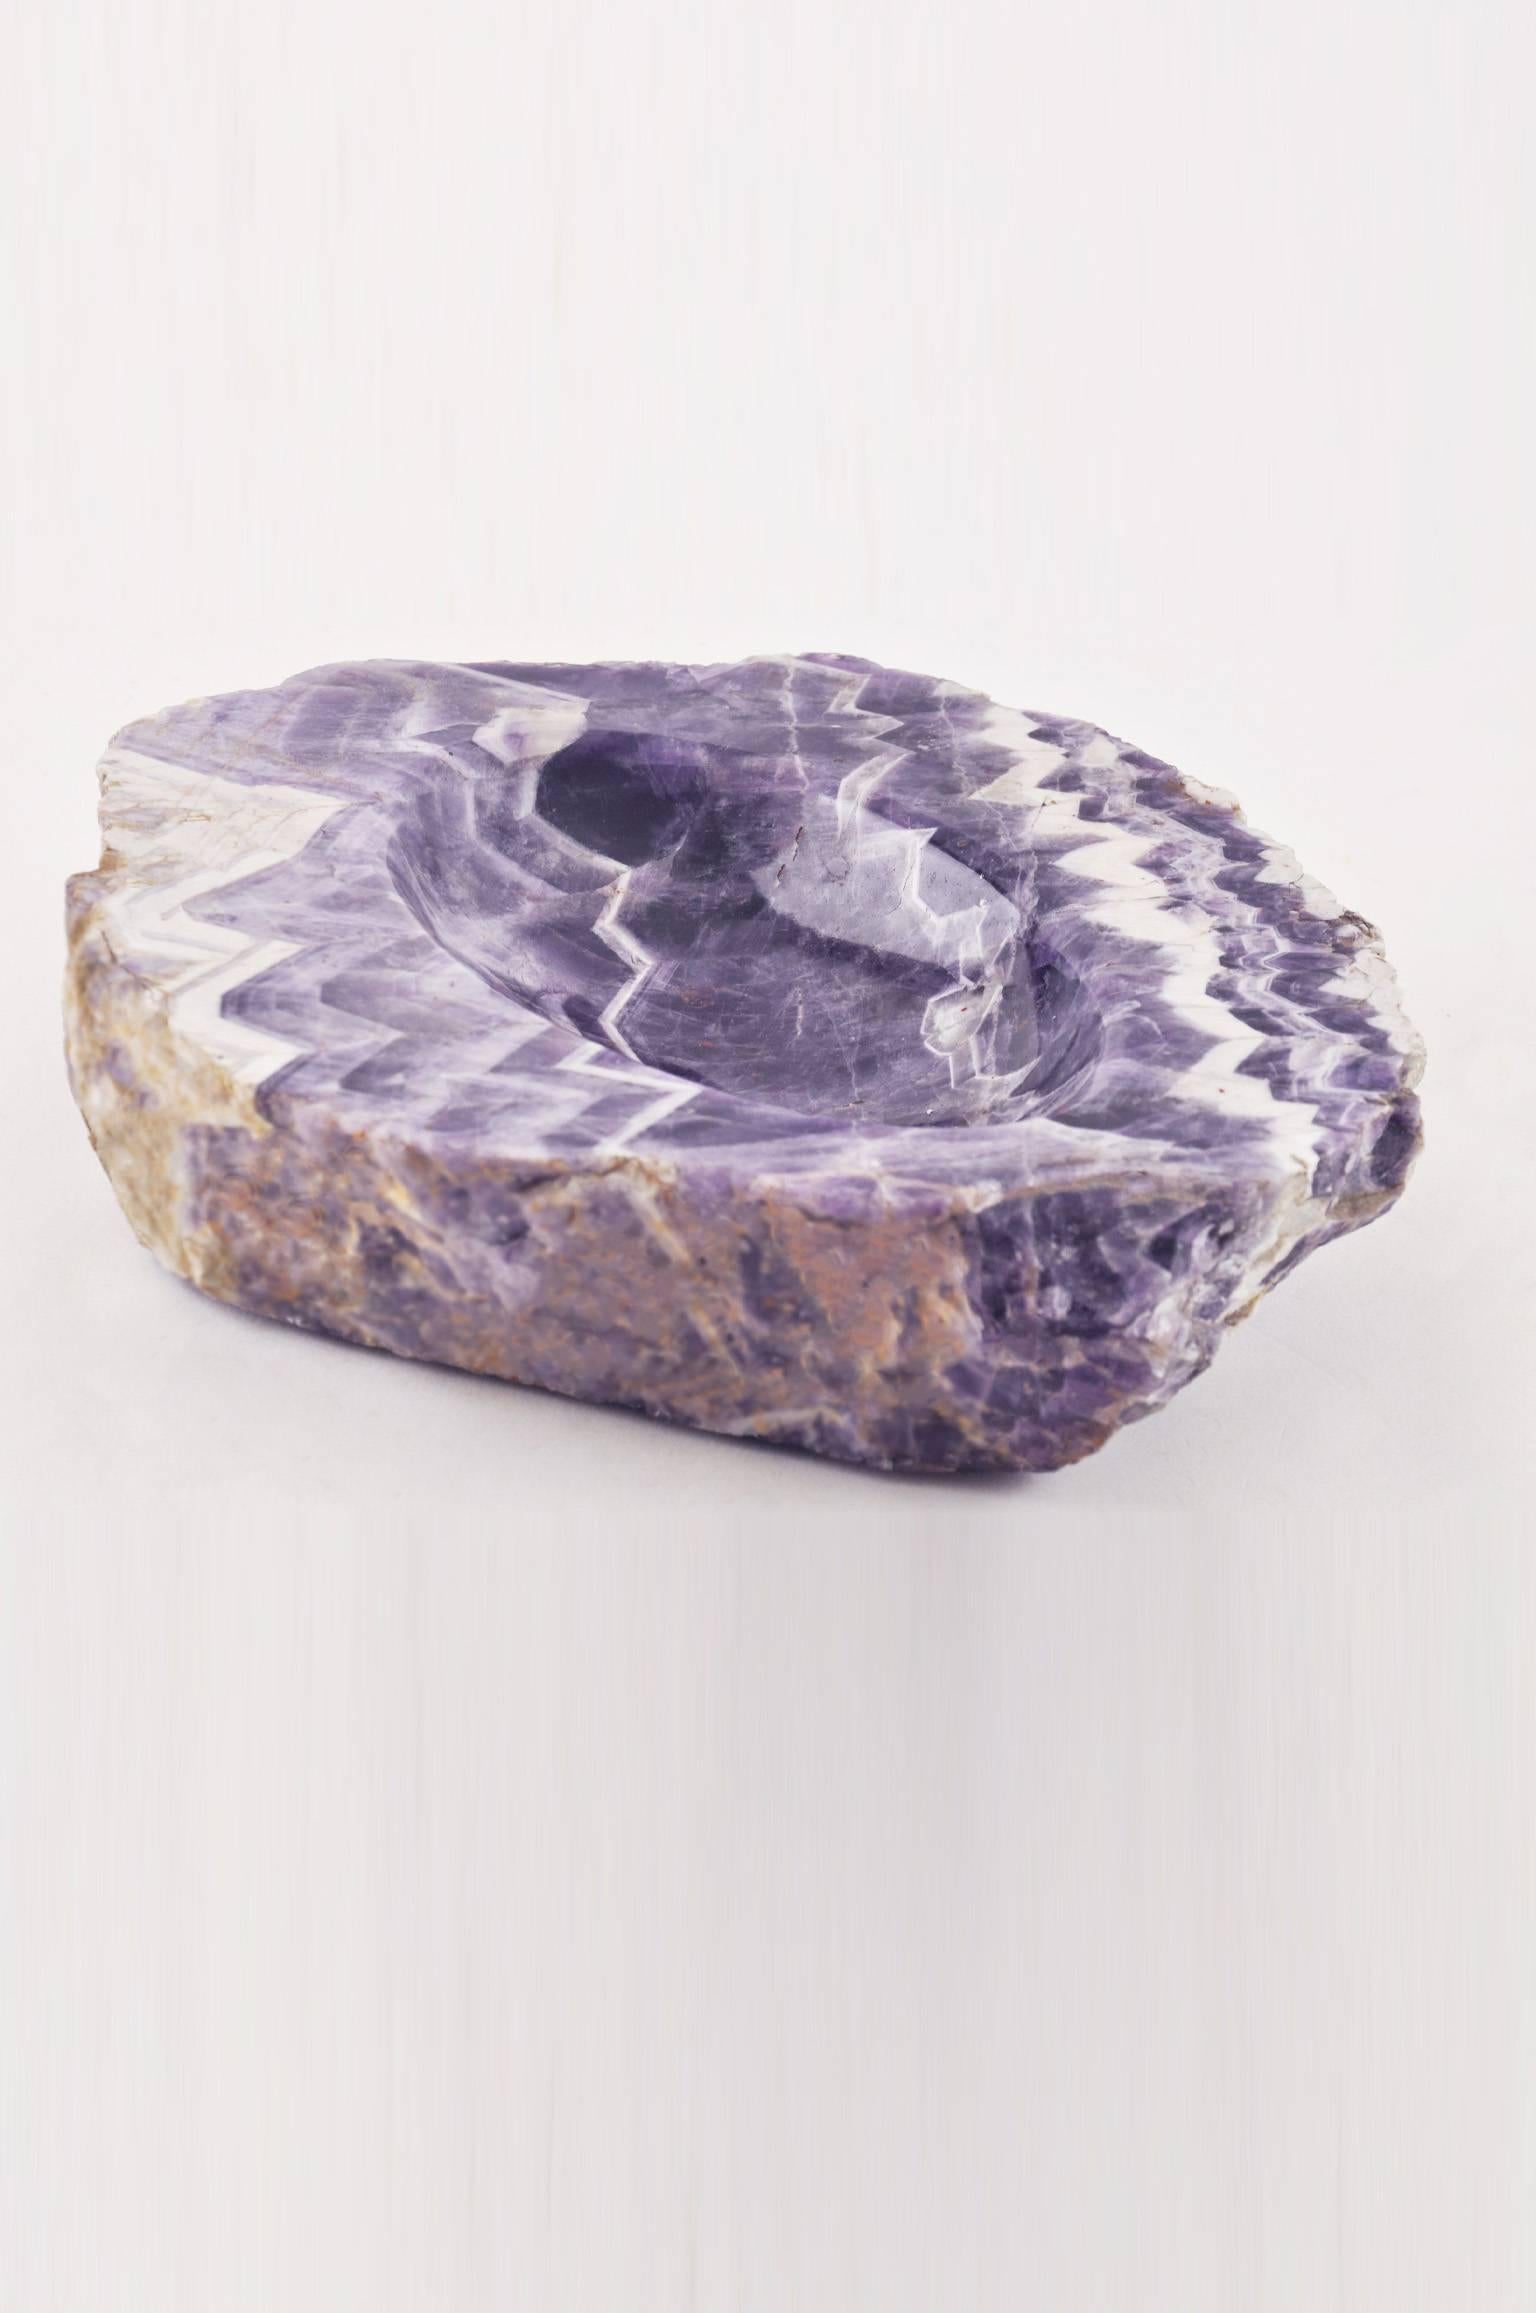 Brutalist amethyst stone ashtray, graphic Item with beautiful frames,
Mid-Century Modern.